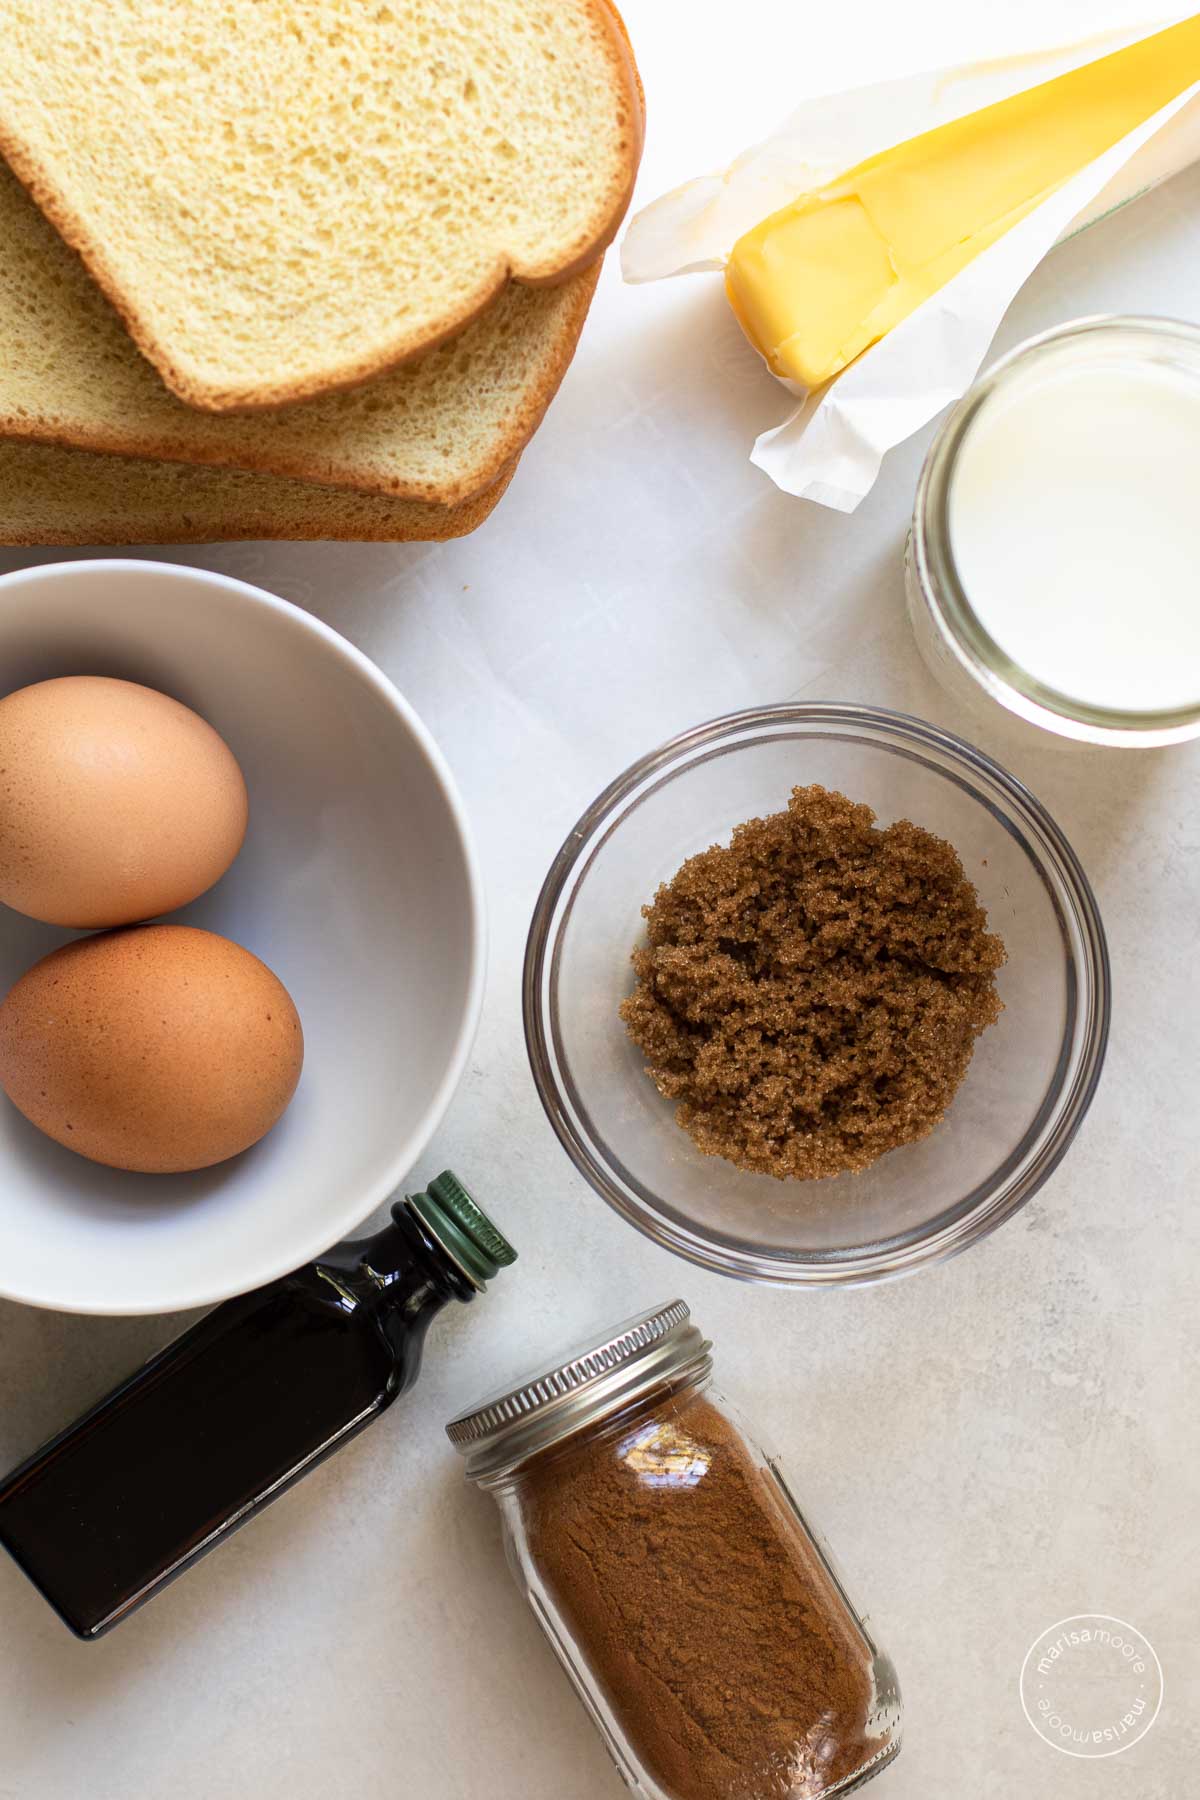 Ingredients for the baked French toast including bread, butter, milk, brown sugar, cinnamon, vanilla in a bottle and eggs in a bowl.